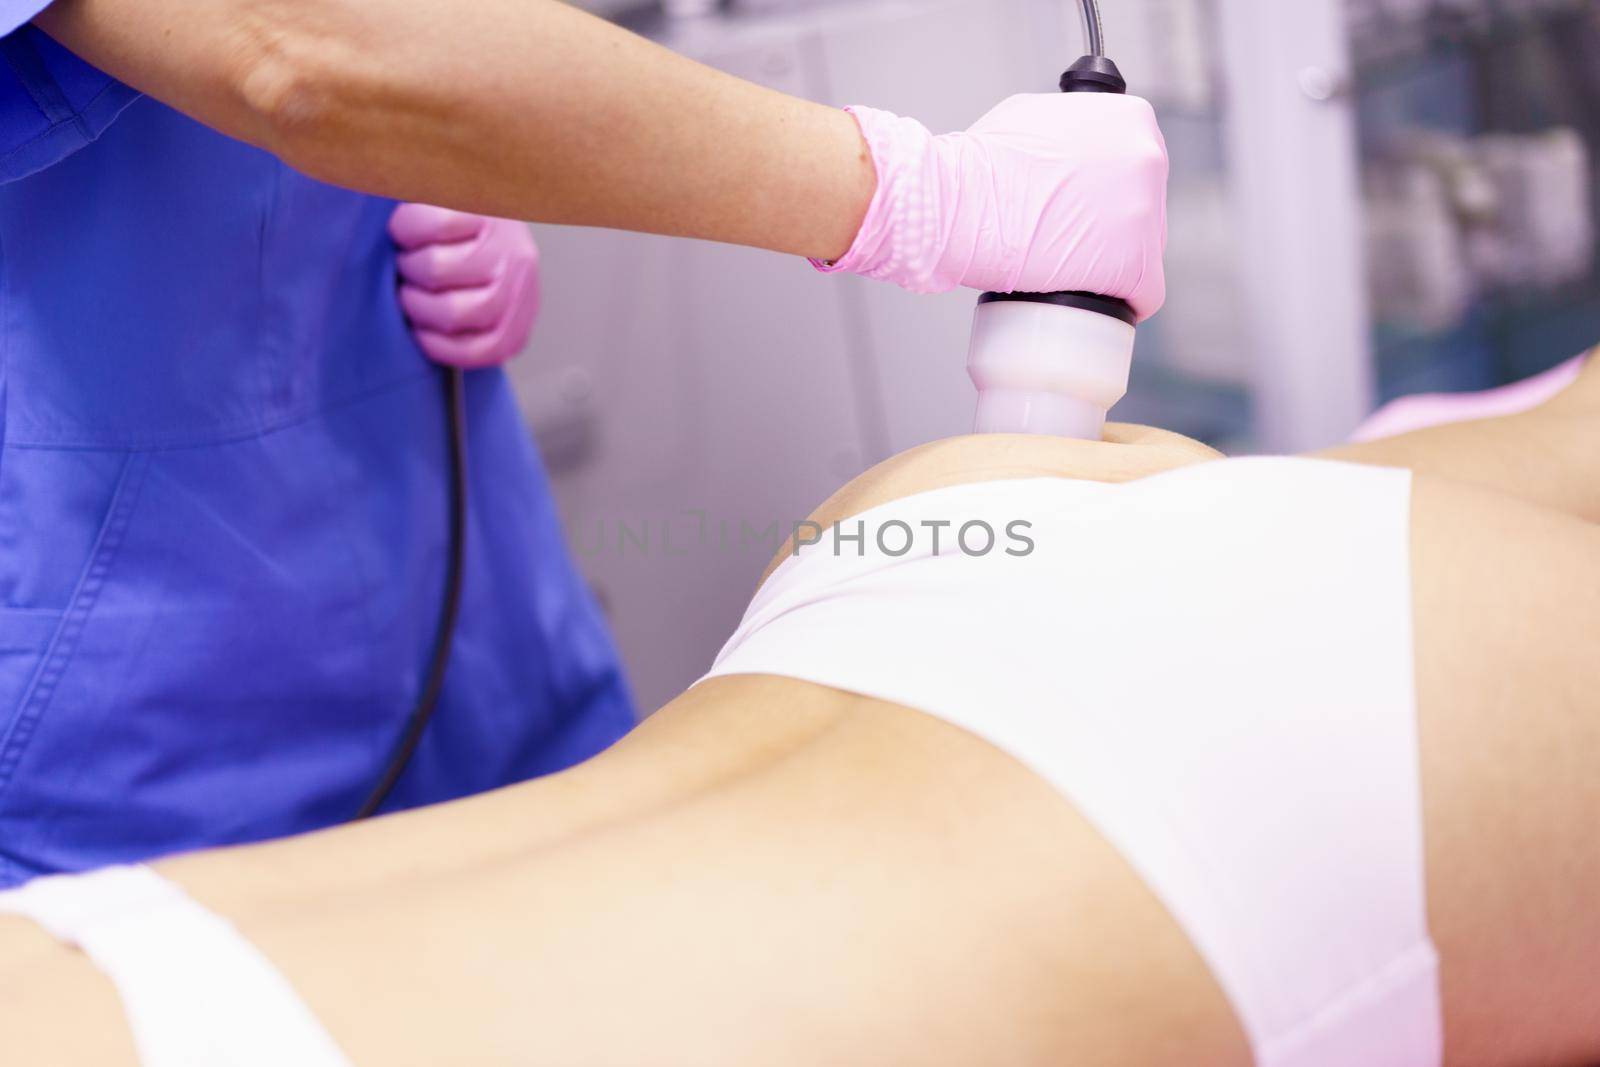 Middle-aged woman receiving anti-cellulite treatment with radiofrequency machine in an aesthetic clinic.